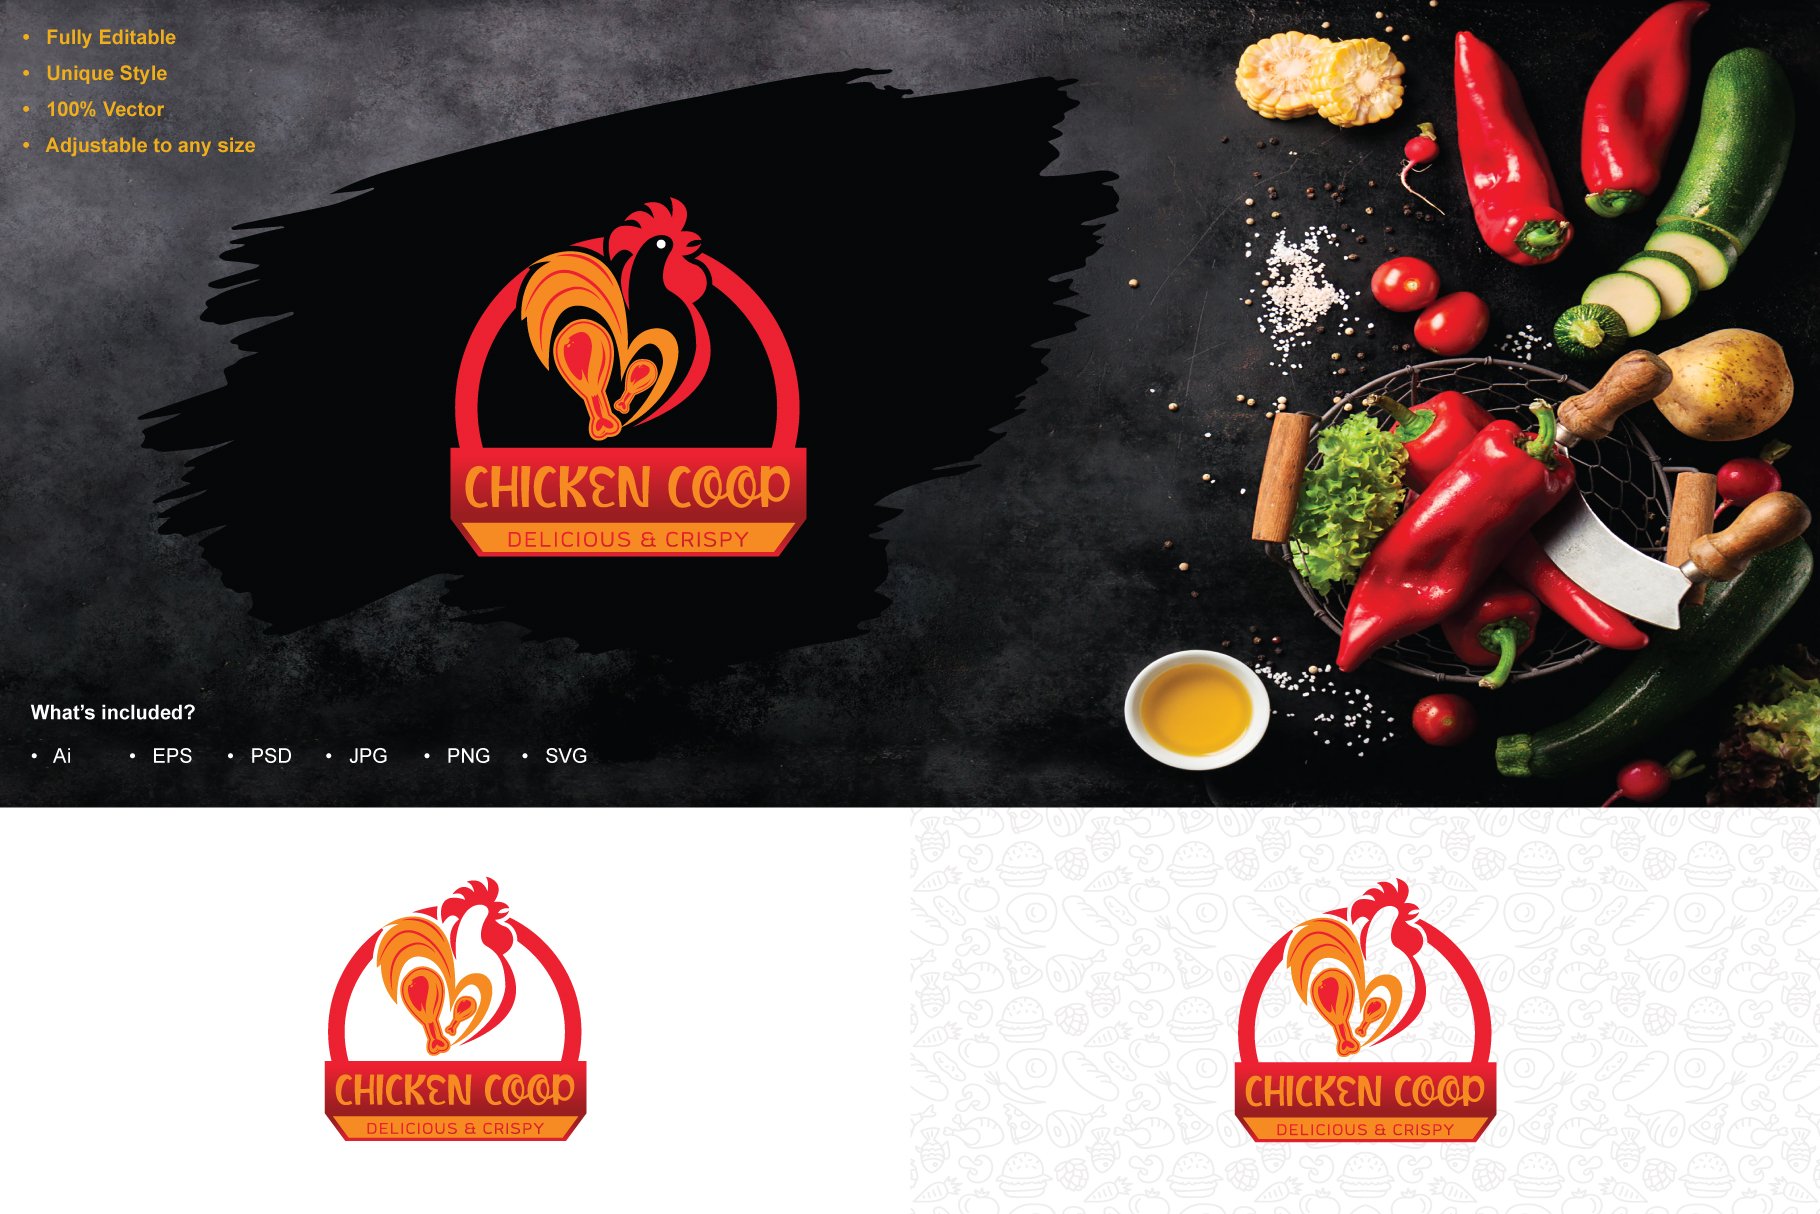 Chicken coop food logo cover image.